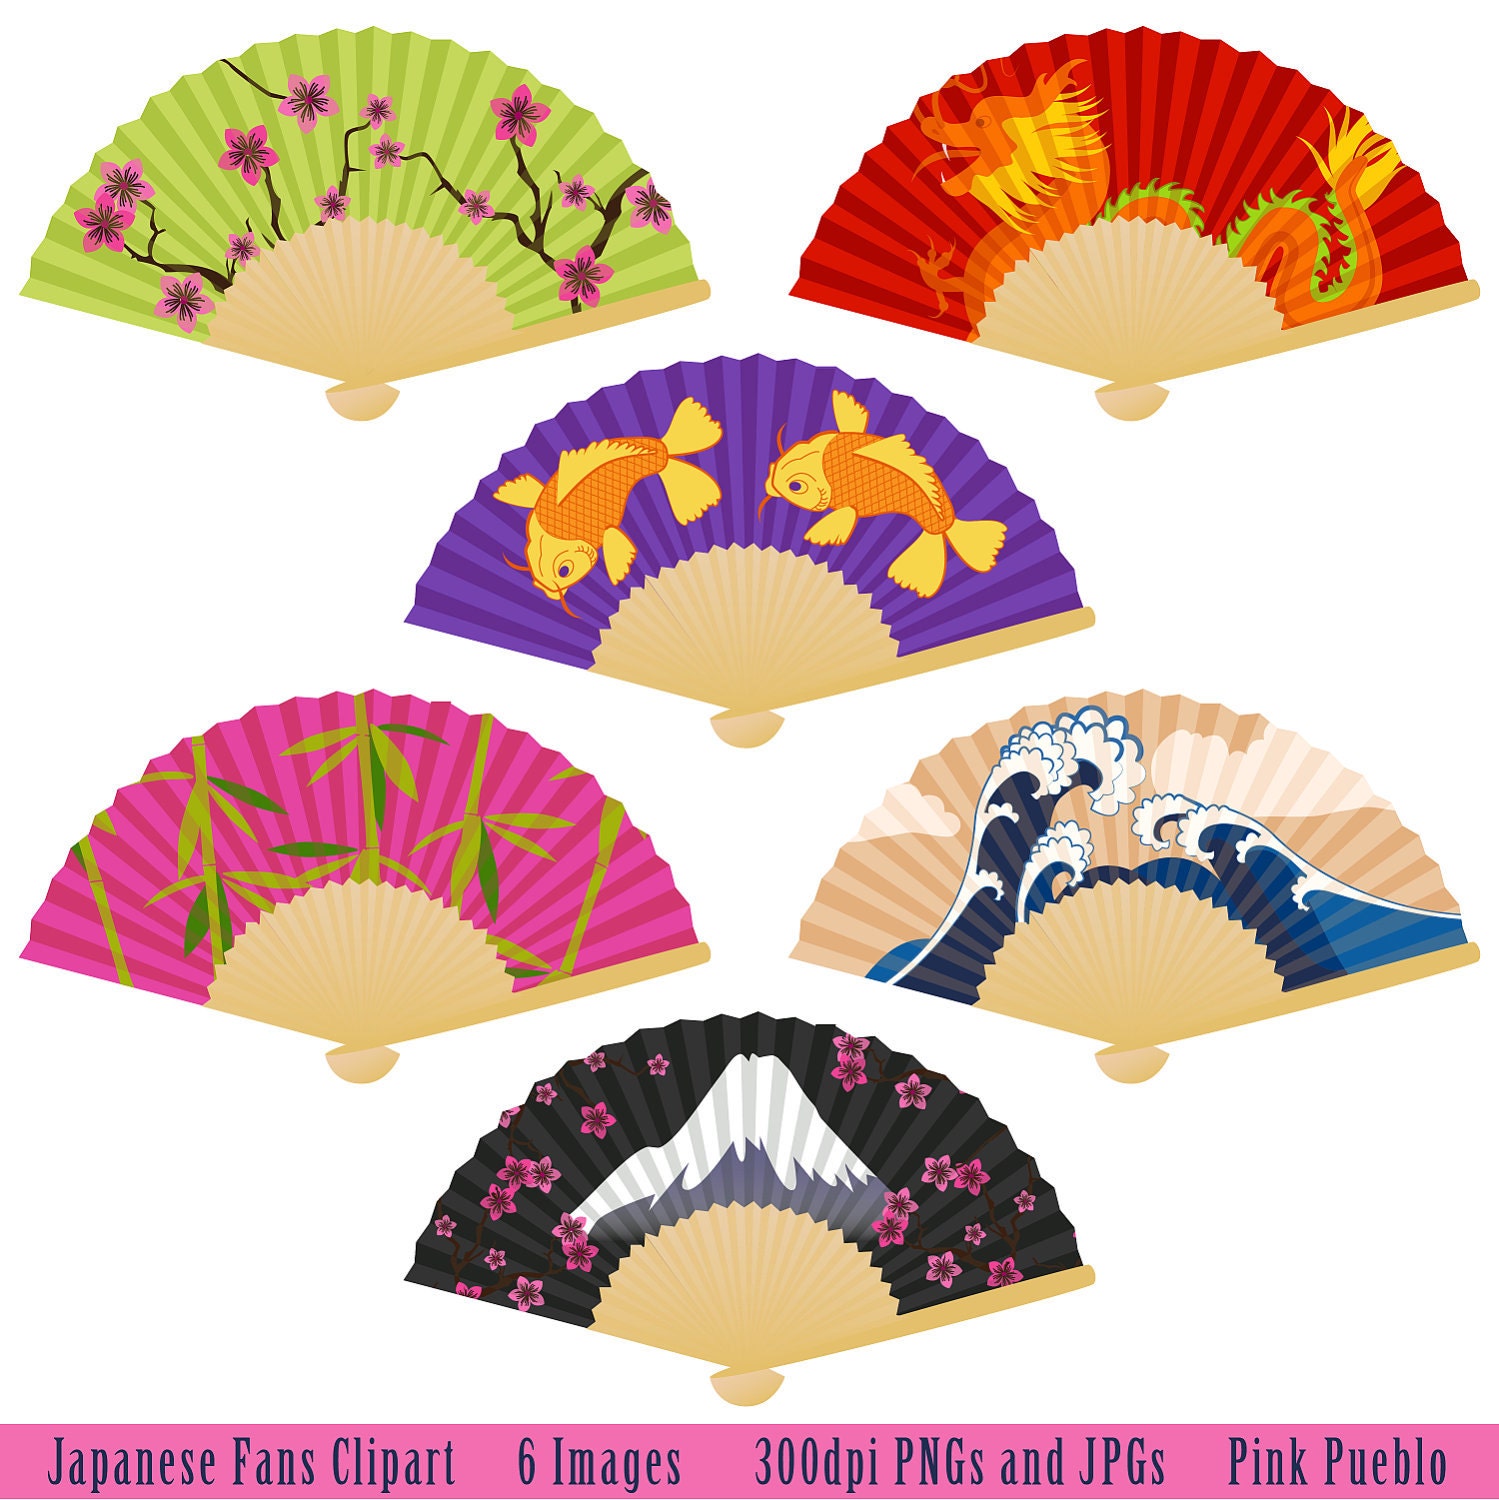 Japanese Fans Clipart Clip Art with Koi Dragon Bamboo
